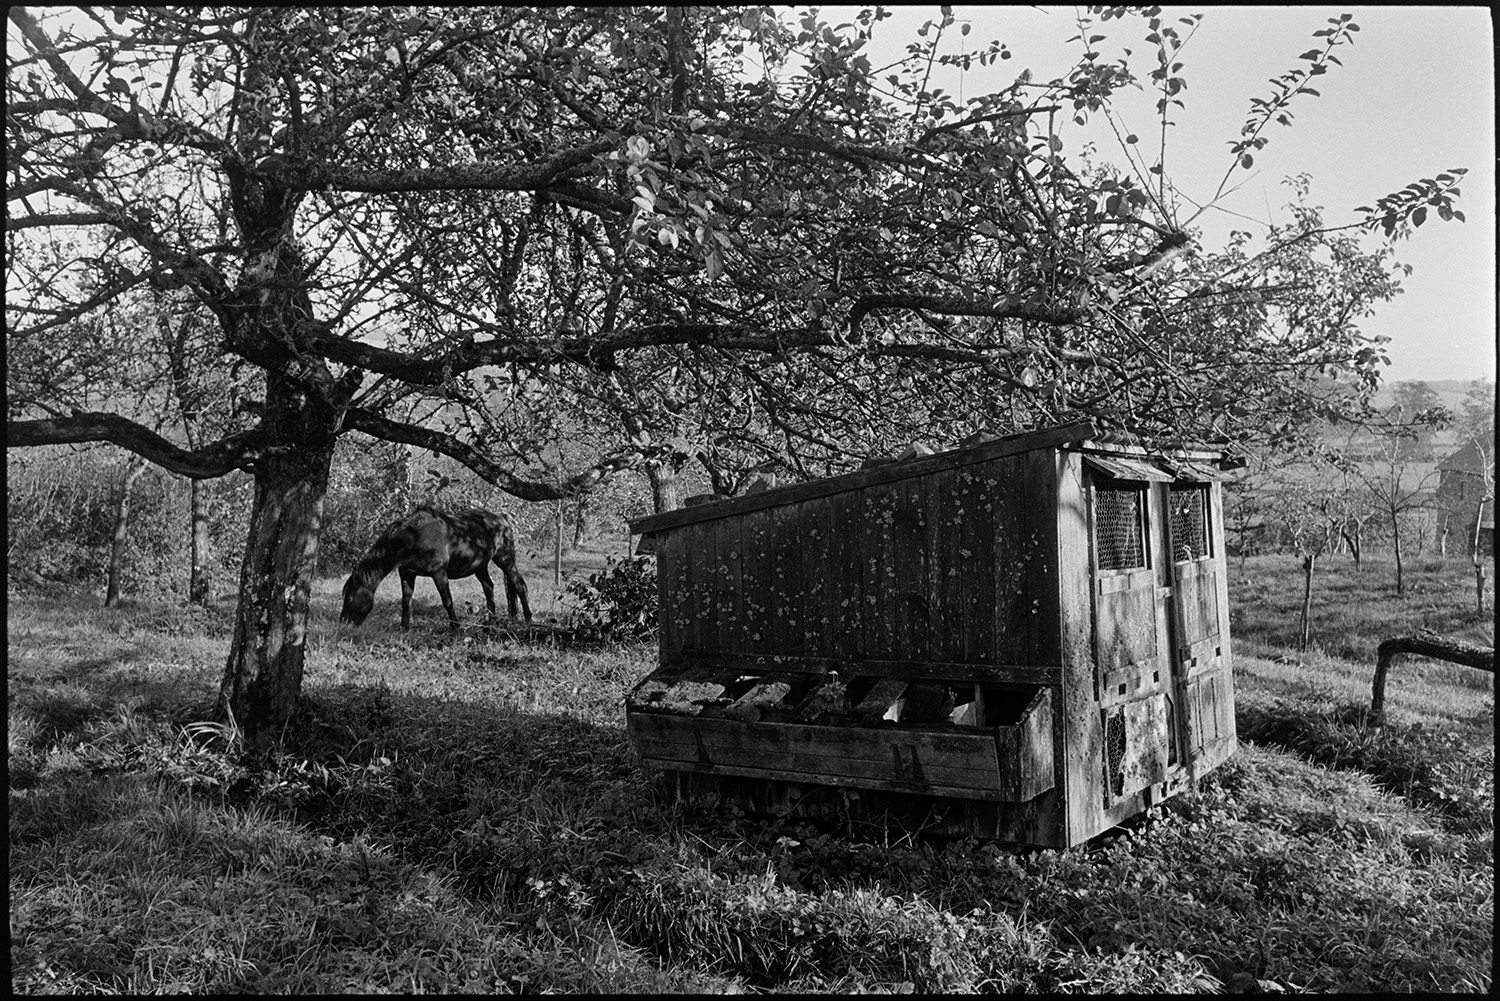 Orchards, Devon, poultry house and horse in orchard. 
[A wooden poultry house in an orchard at Rashleigh Mill, Bridge Reeve. A horse is grazing in the orchard in the background.]